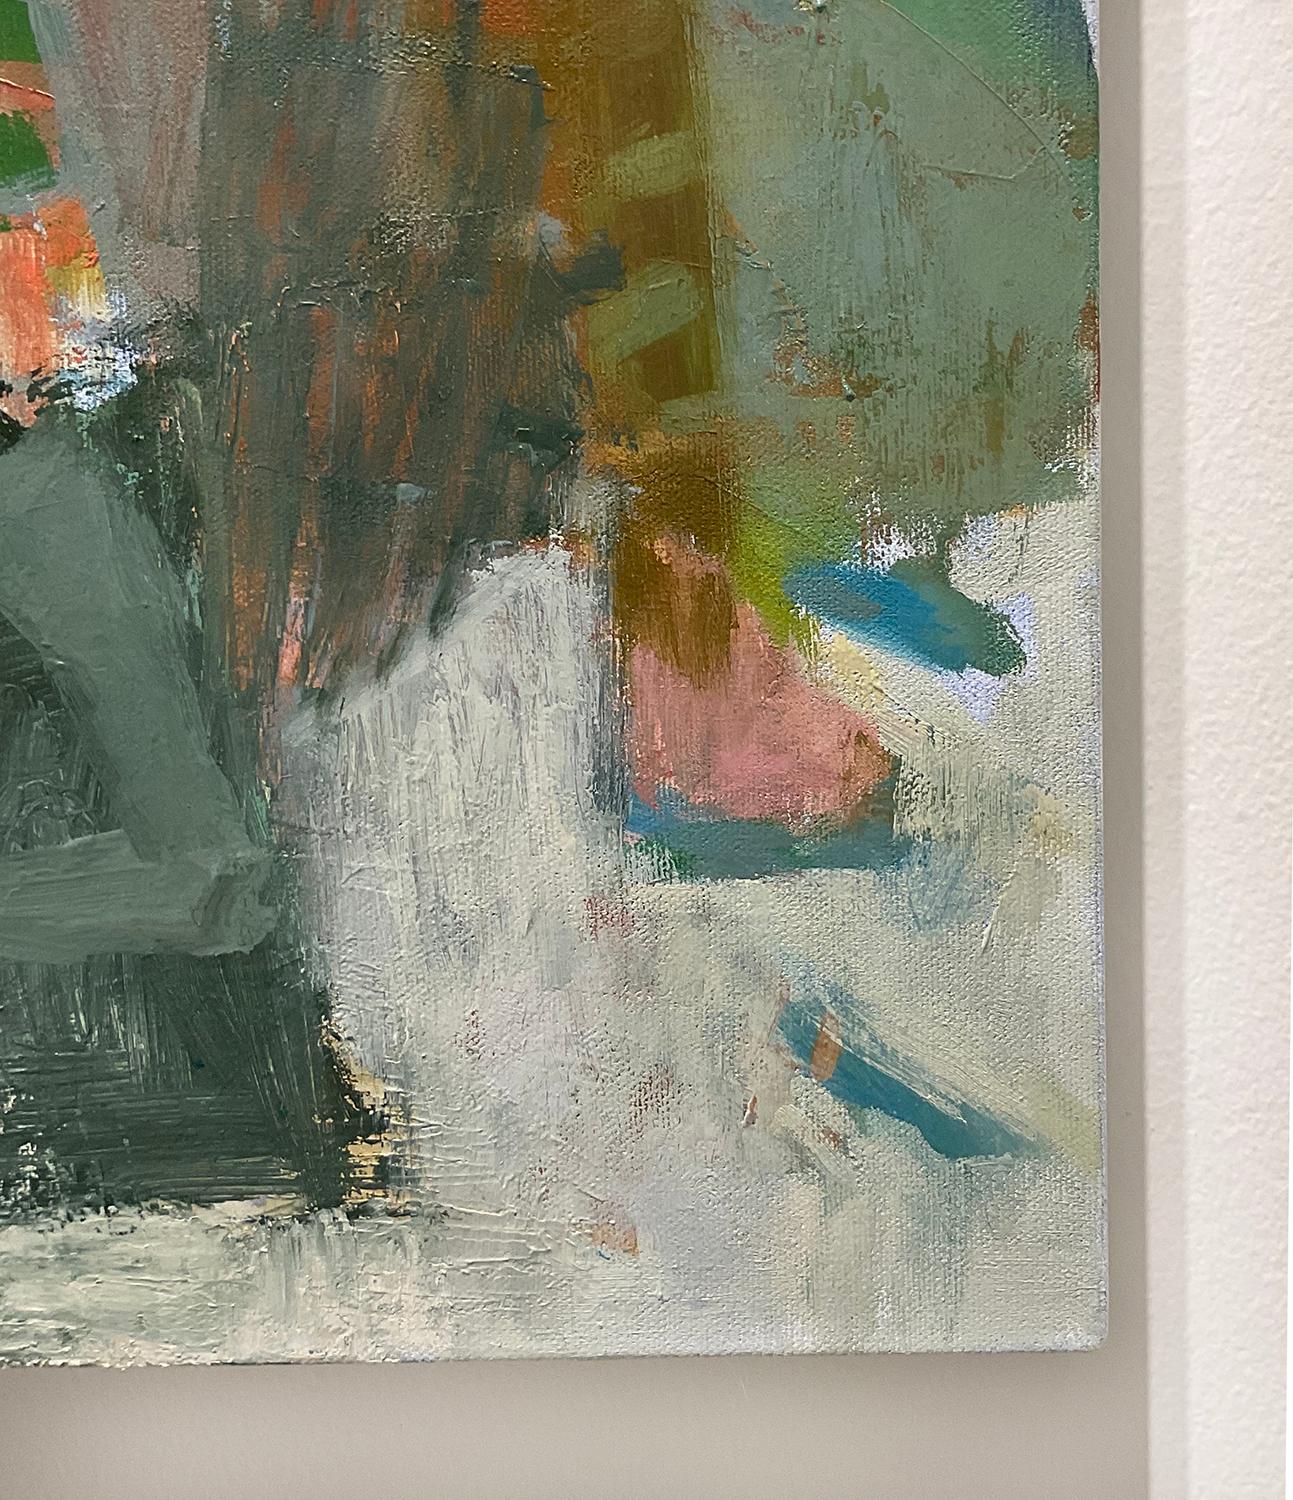 Square abstract expressionist oil painting on canvas in dusty blue, stone blue, teal, dusty pink, gray, and forest green, with hints of orange throughout
'Pink and Stripes' painted by Hudson Valley artist, Jenny Nelson, in 2021
Oil on canvas
20 x 20